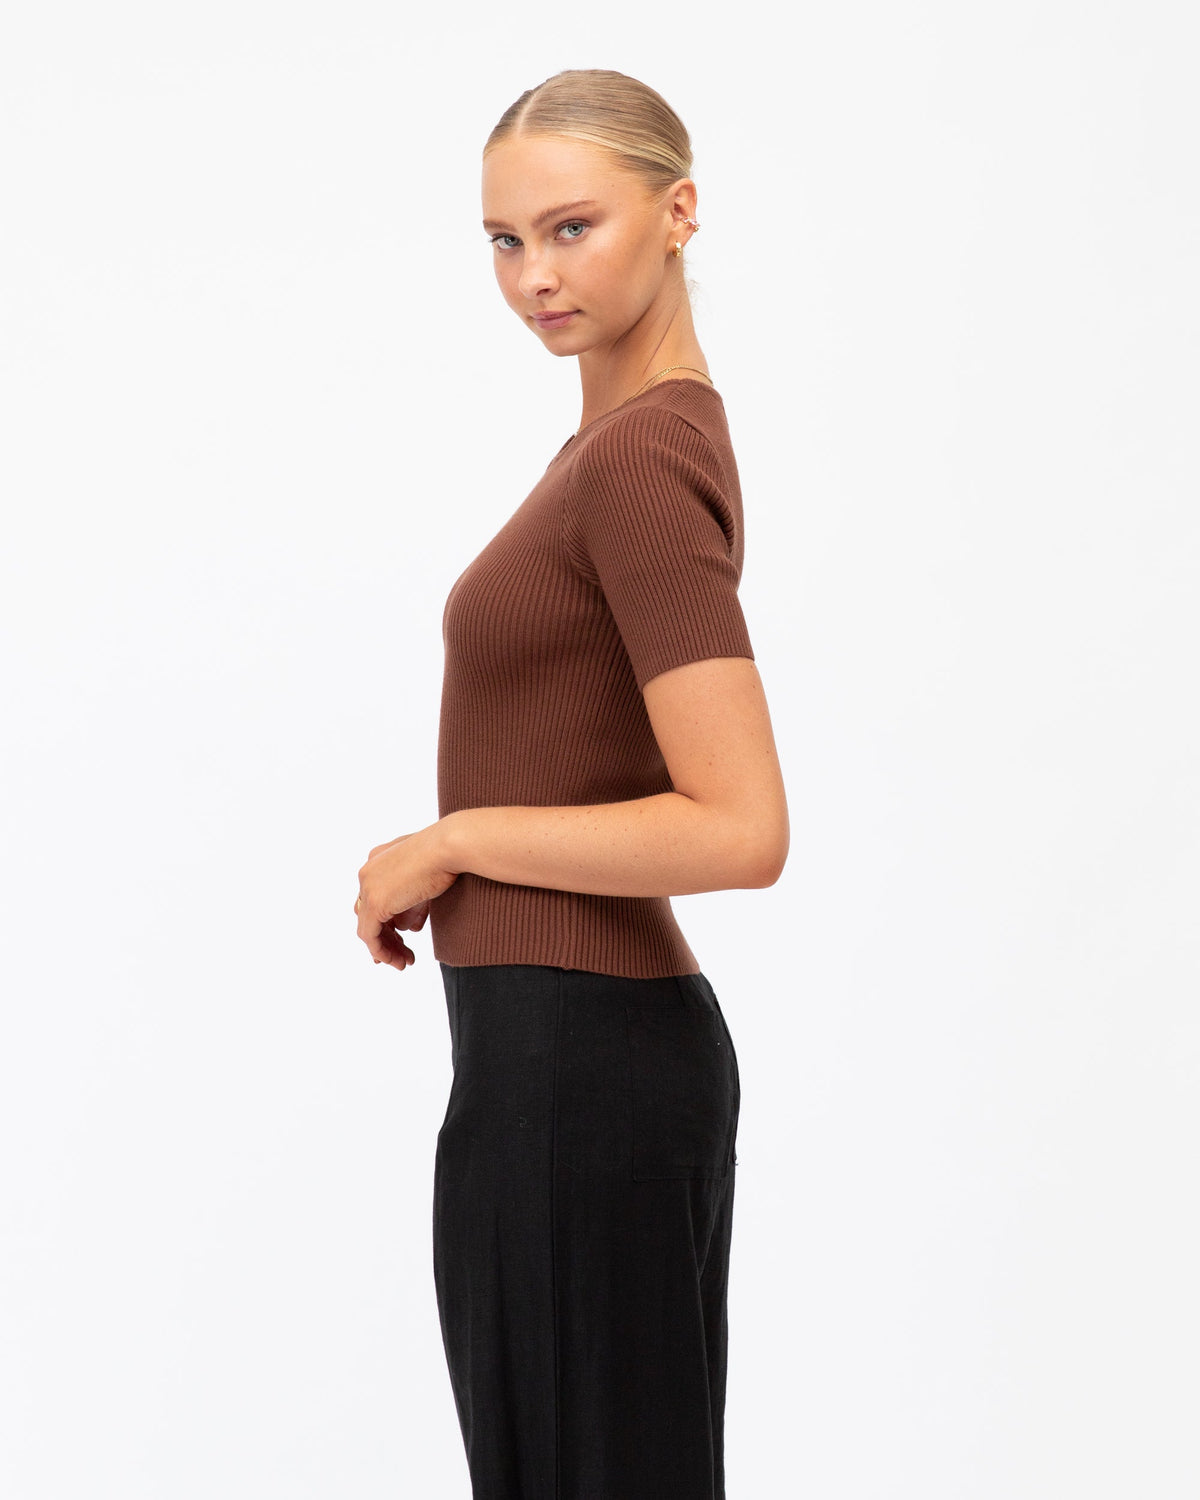 CHOCOLATE SHORT SLEEVE KNIT TOP